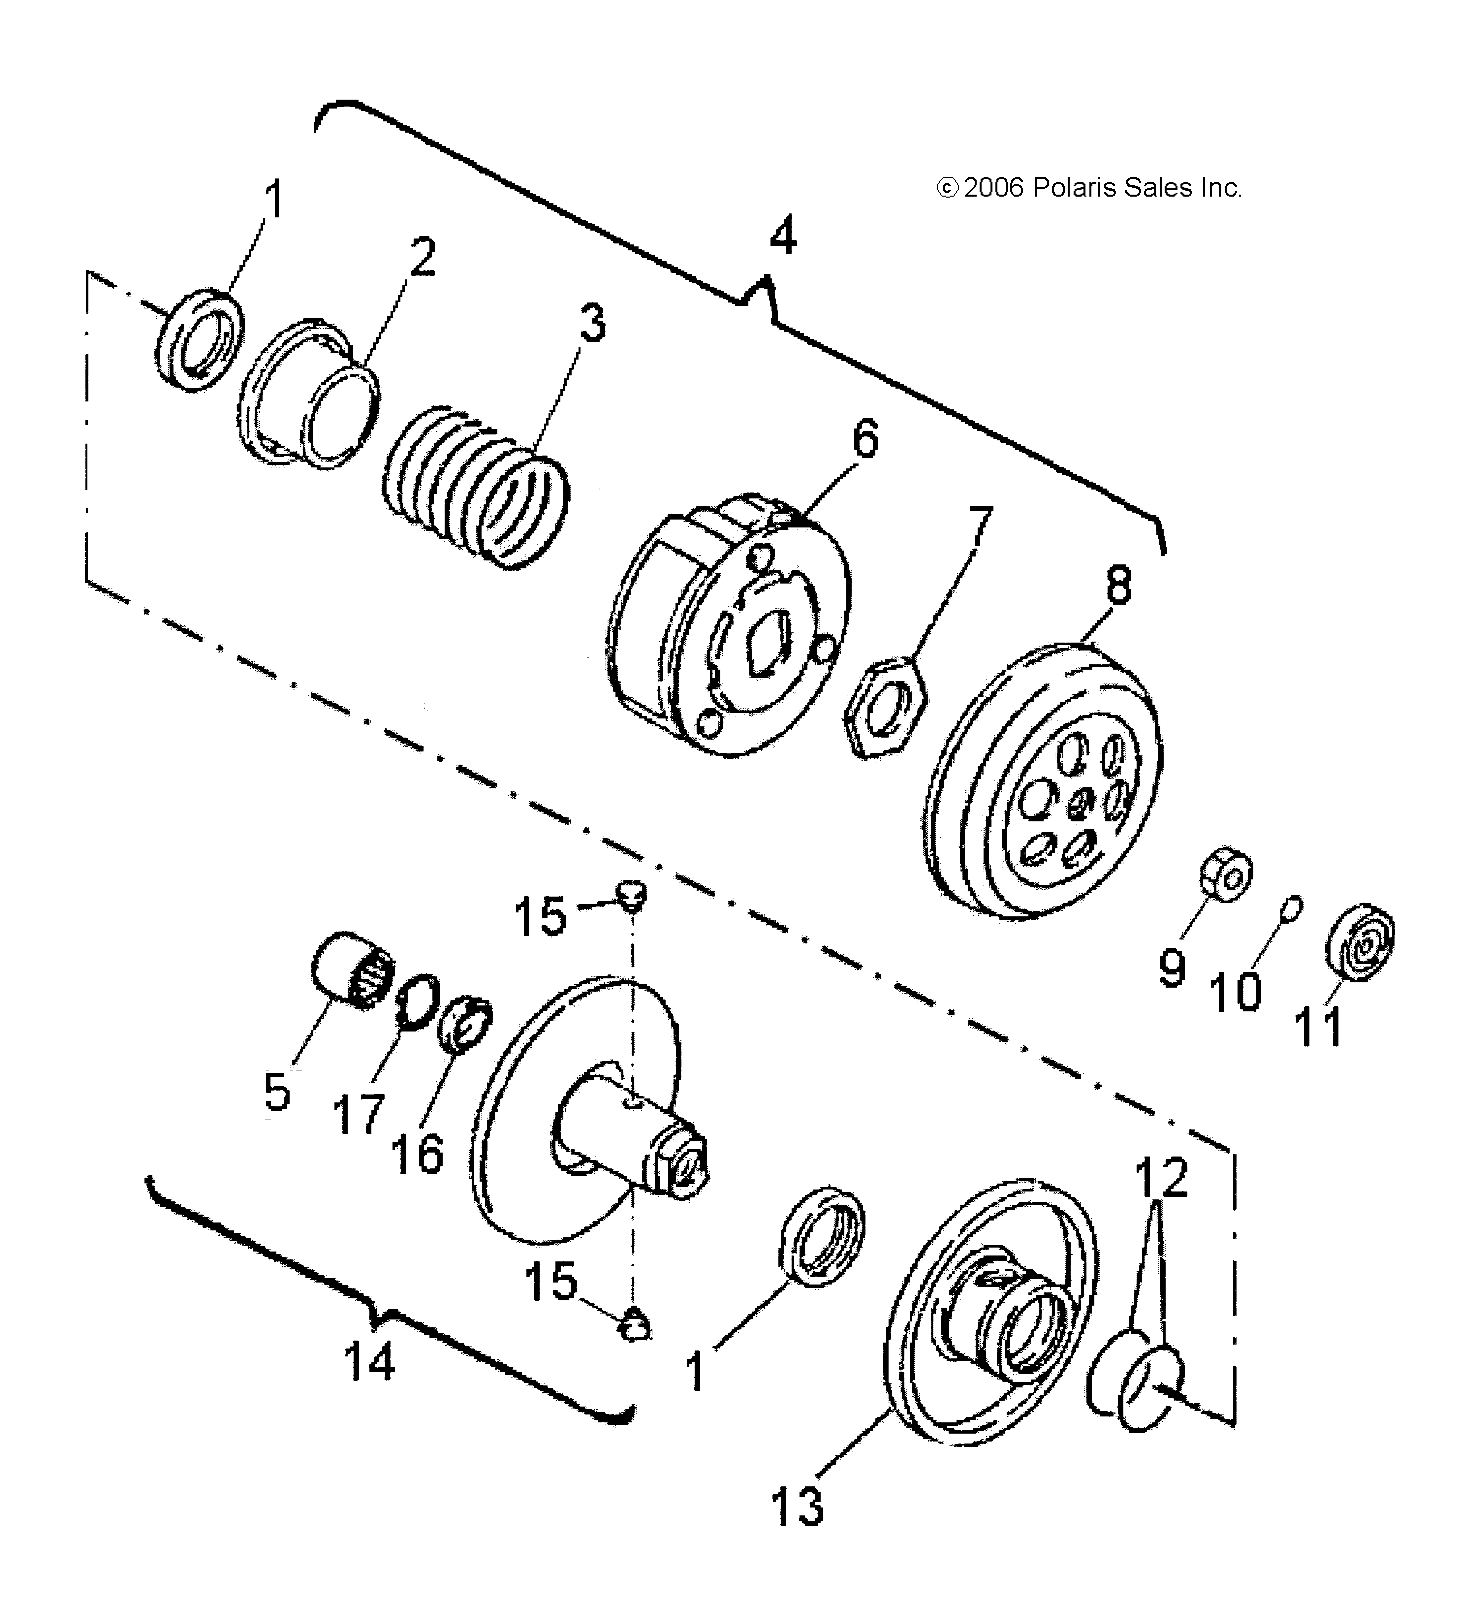 Part Number : 0455381 ASM-CARRIER CLUTCH OUTLAW